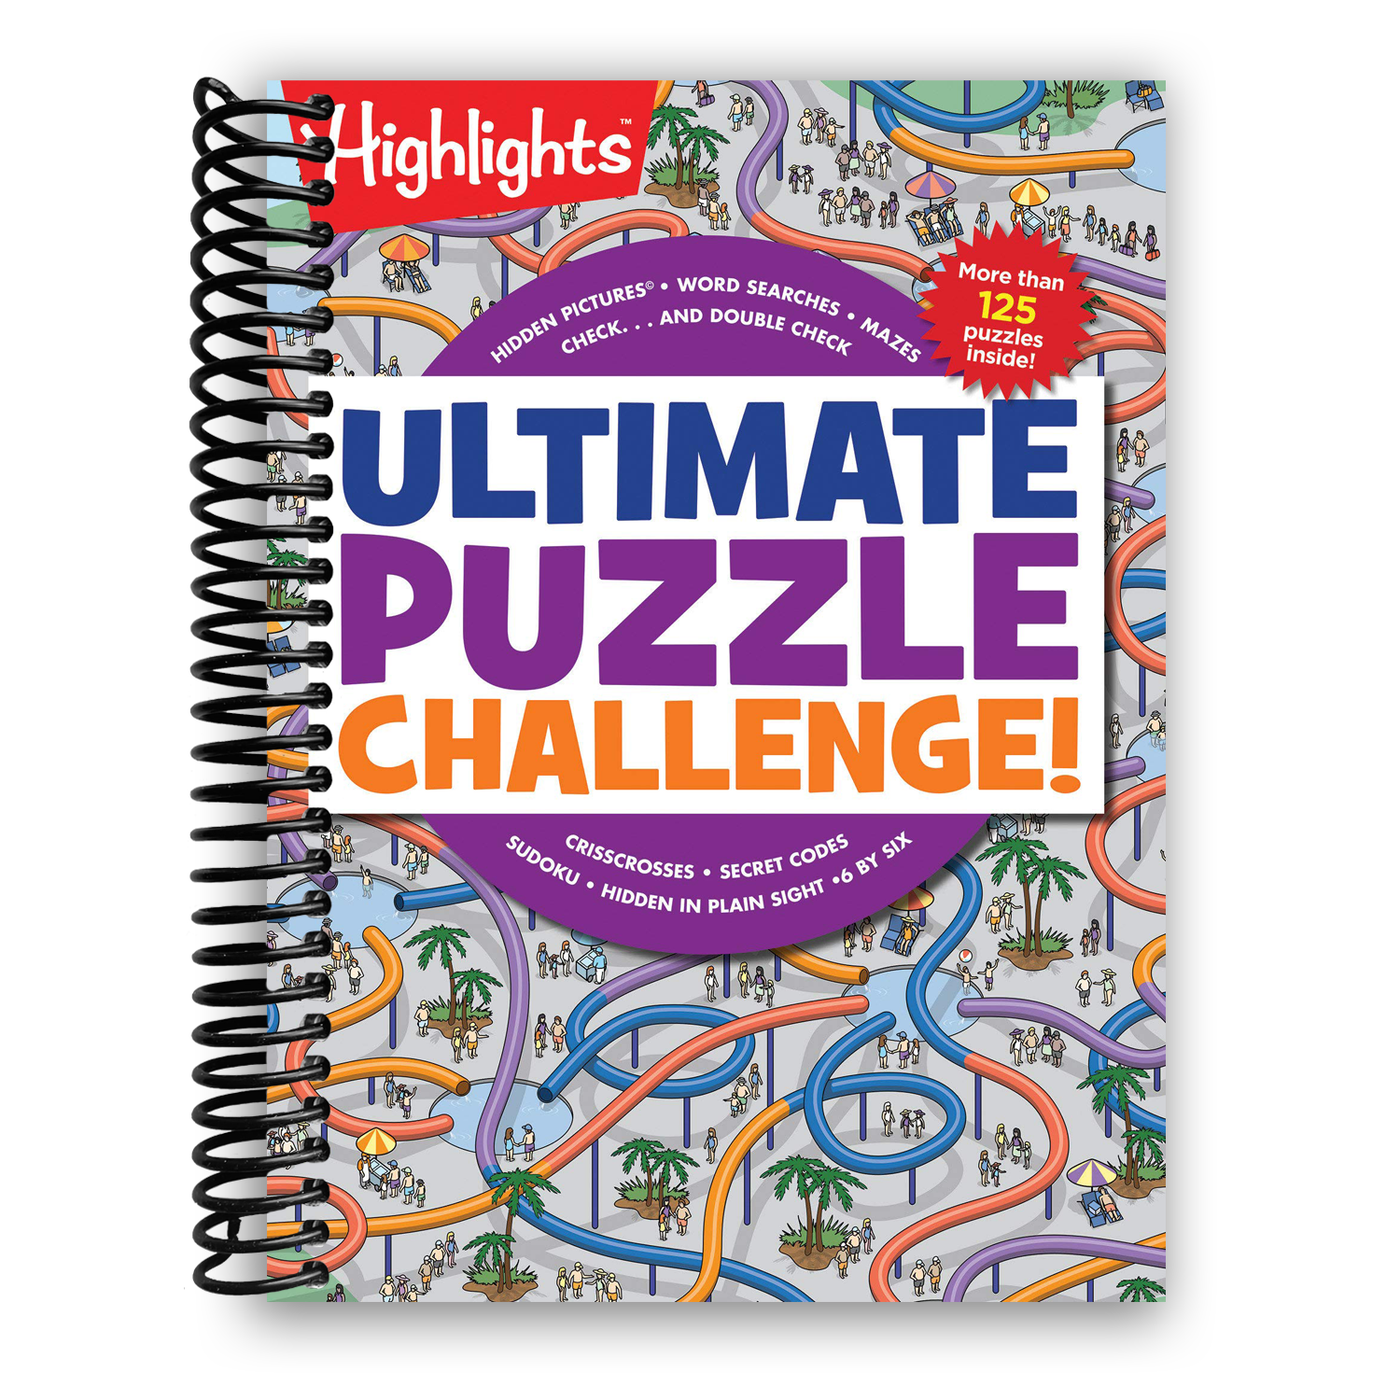 Ultimate Puzzle Challenge! Highlights Jumbo Books & Pads (Spiral Bound)